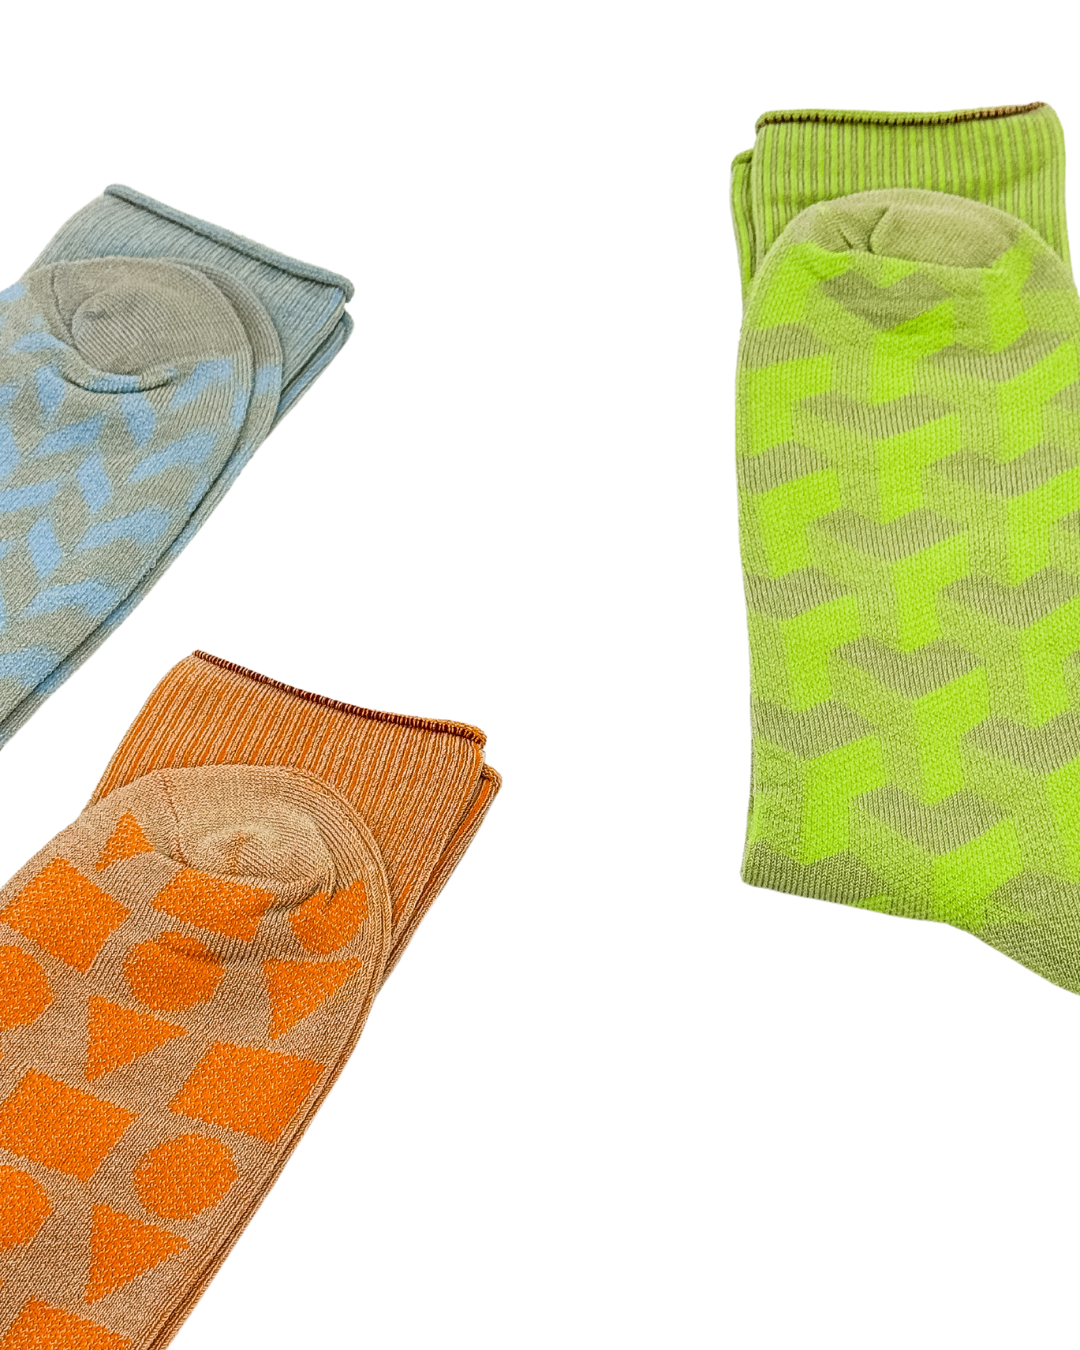 3D Pattern, 3 Pairs/Pack - Socks for men, perfect gift